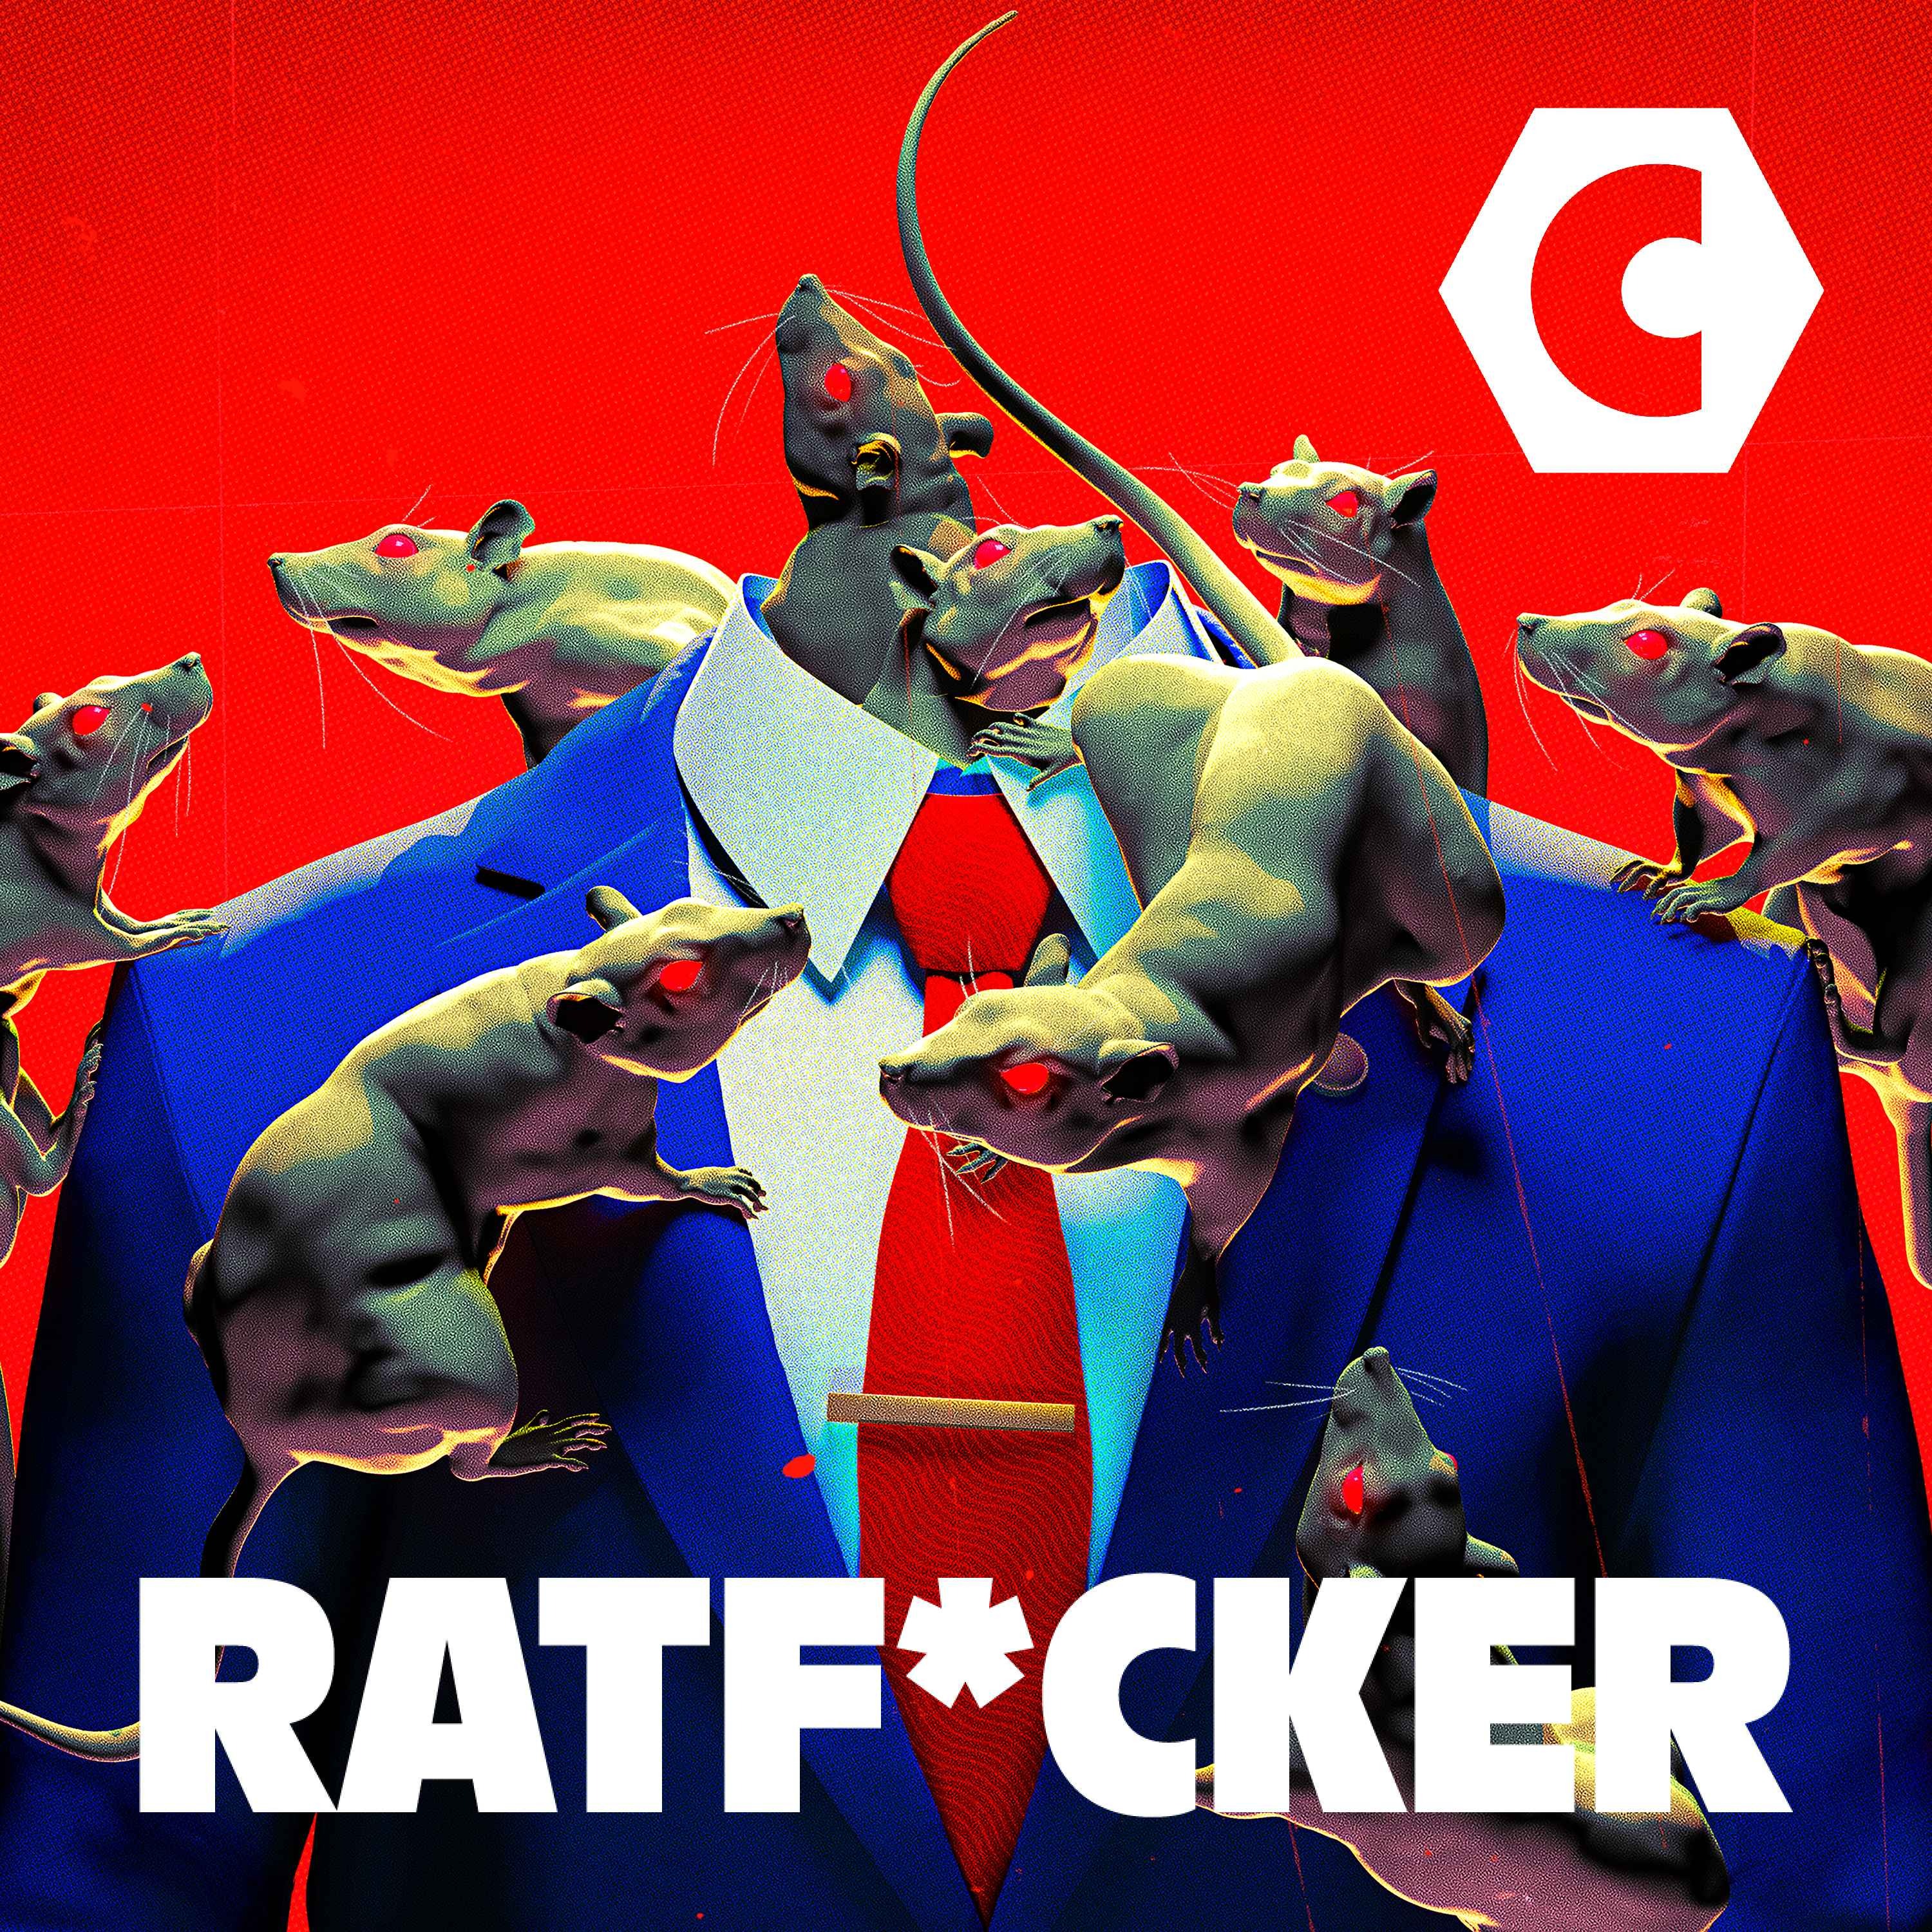 Introducing our new series: Ratfucker